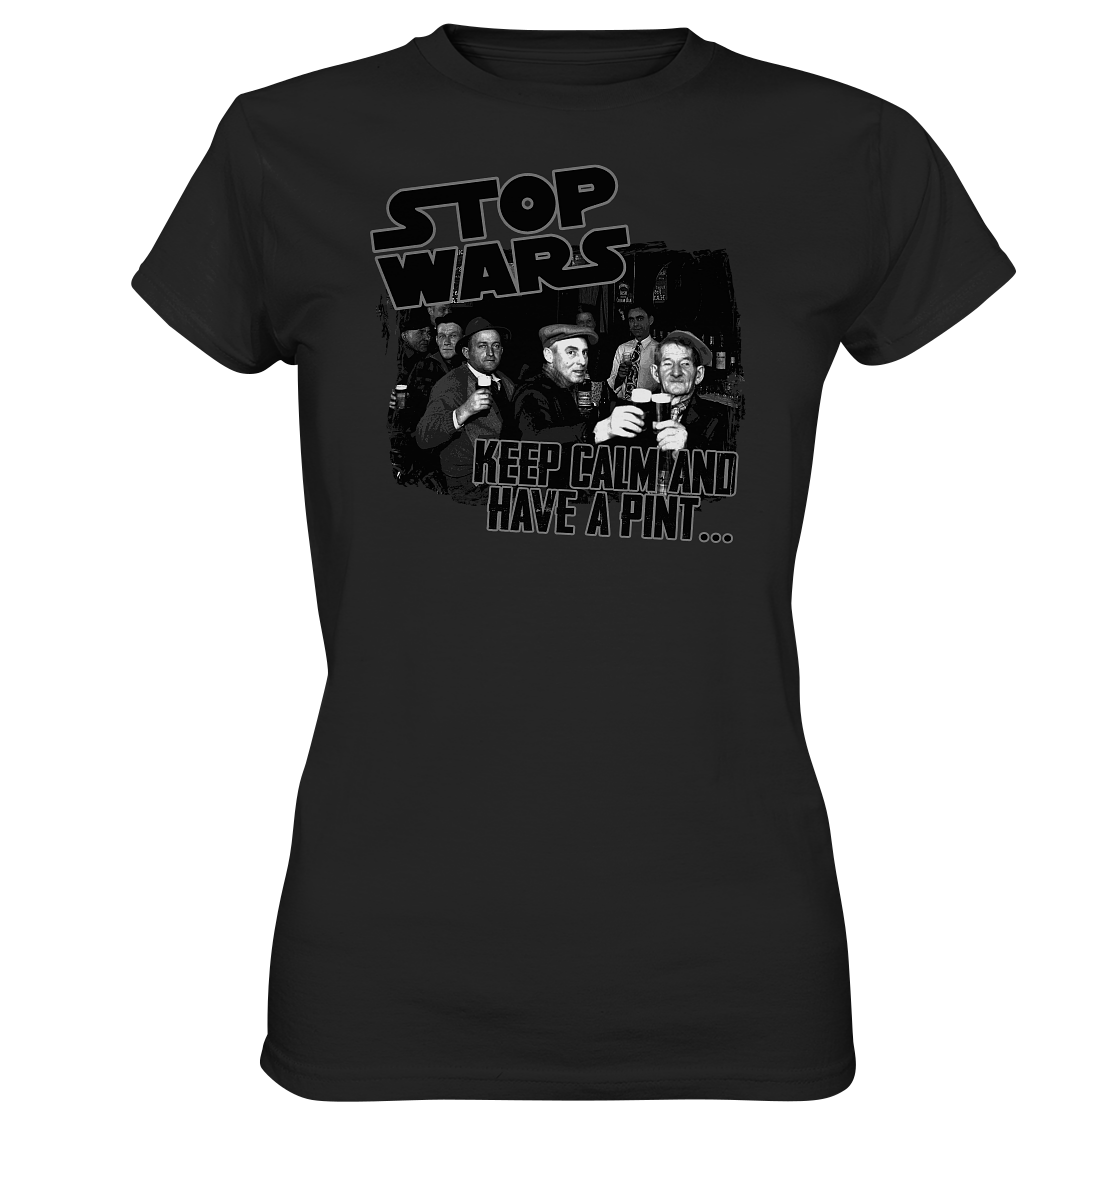 Stop Wars "Keep Calm And Have A Pint" - Ladies Premium Shirt